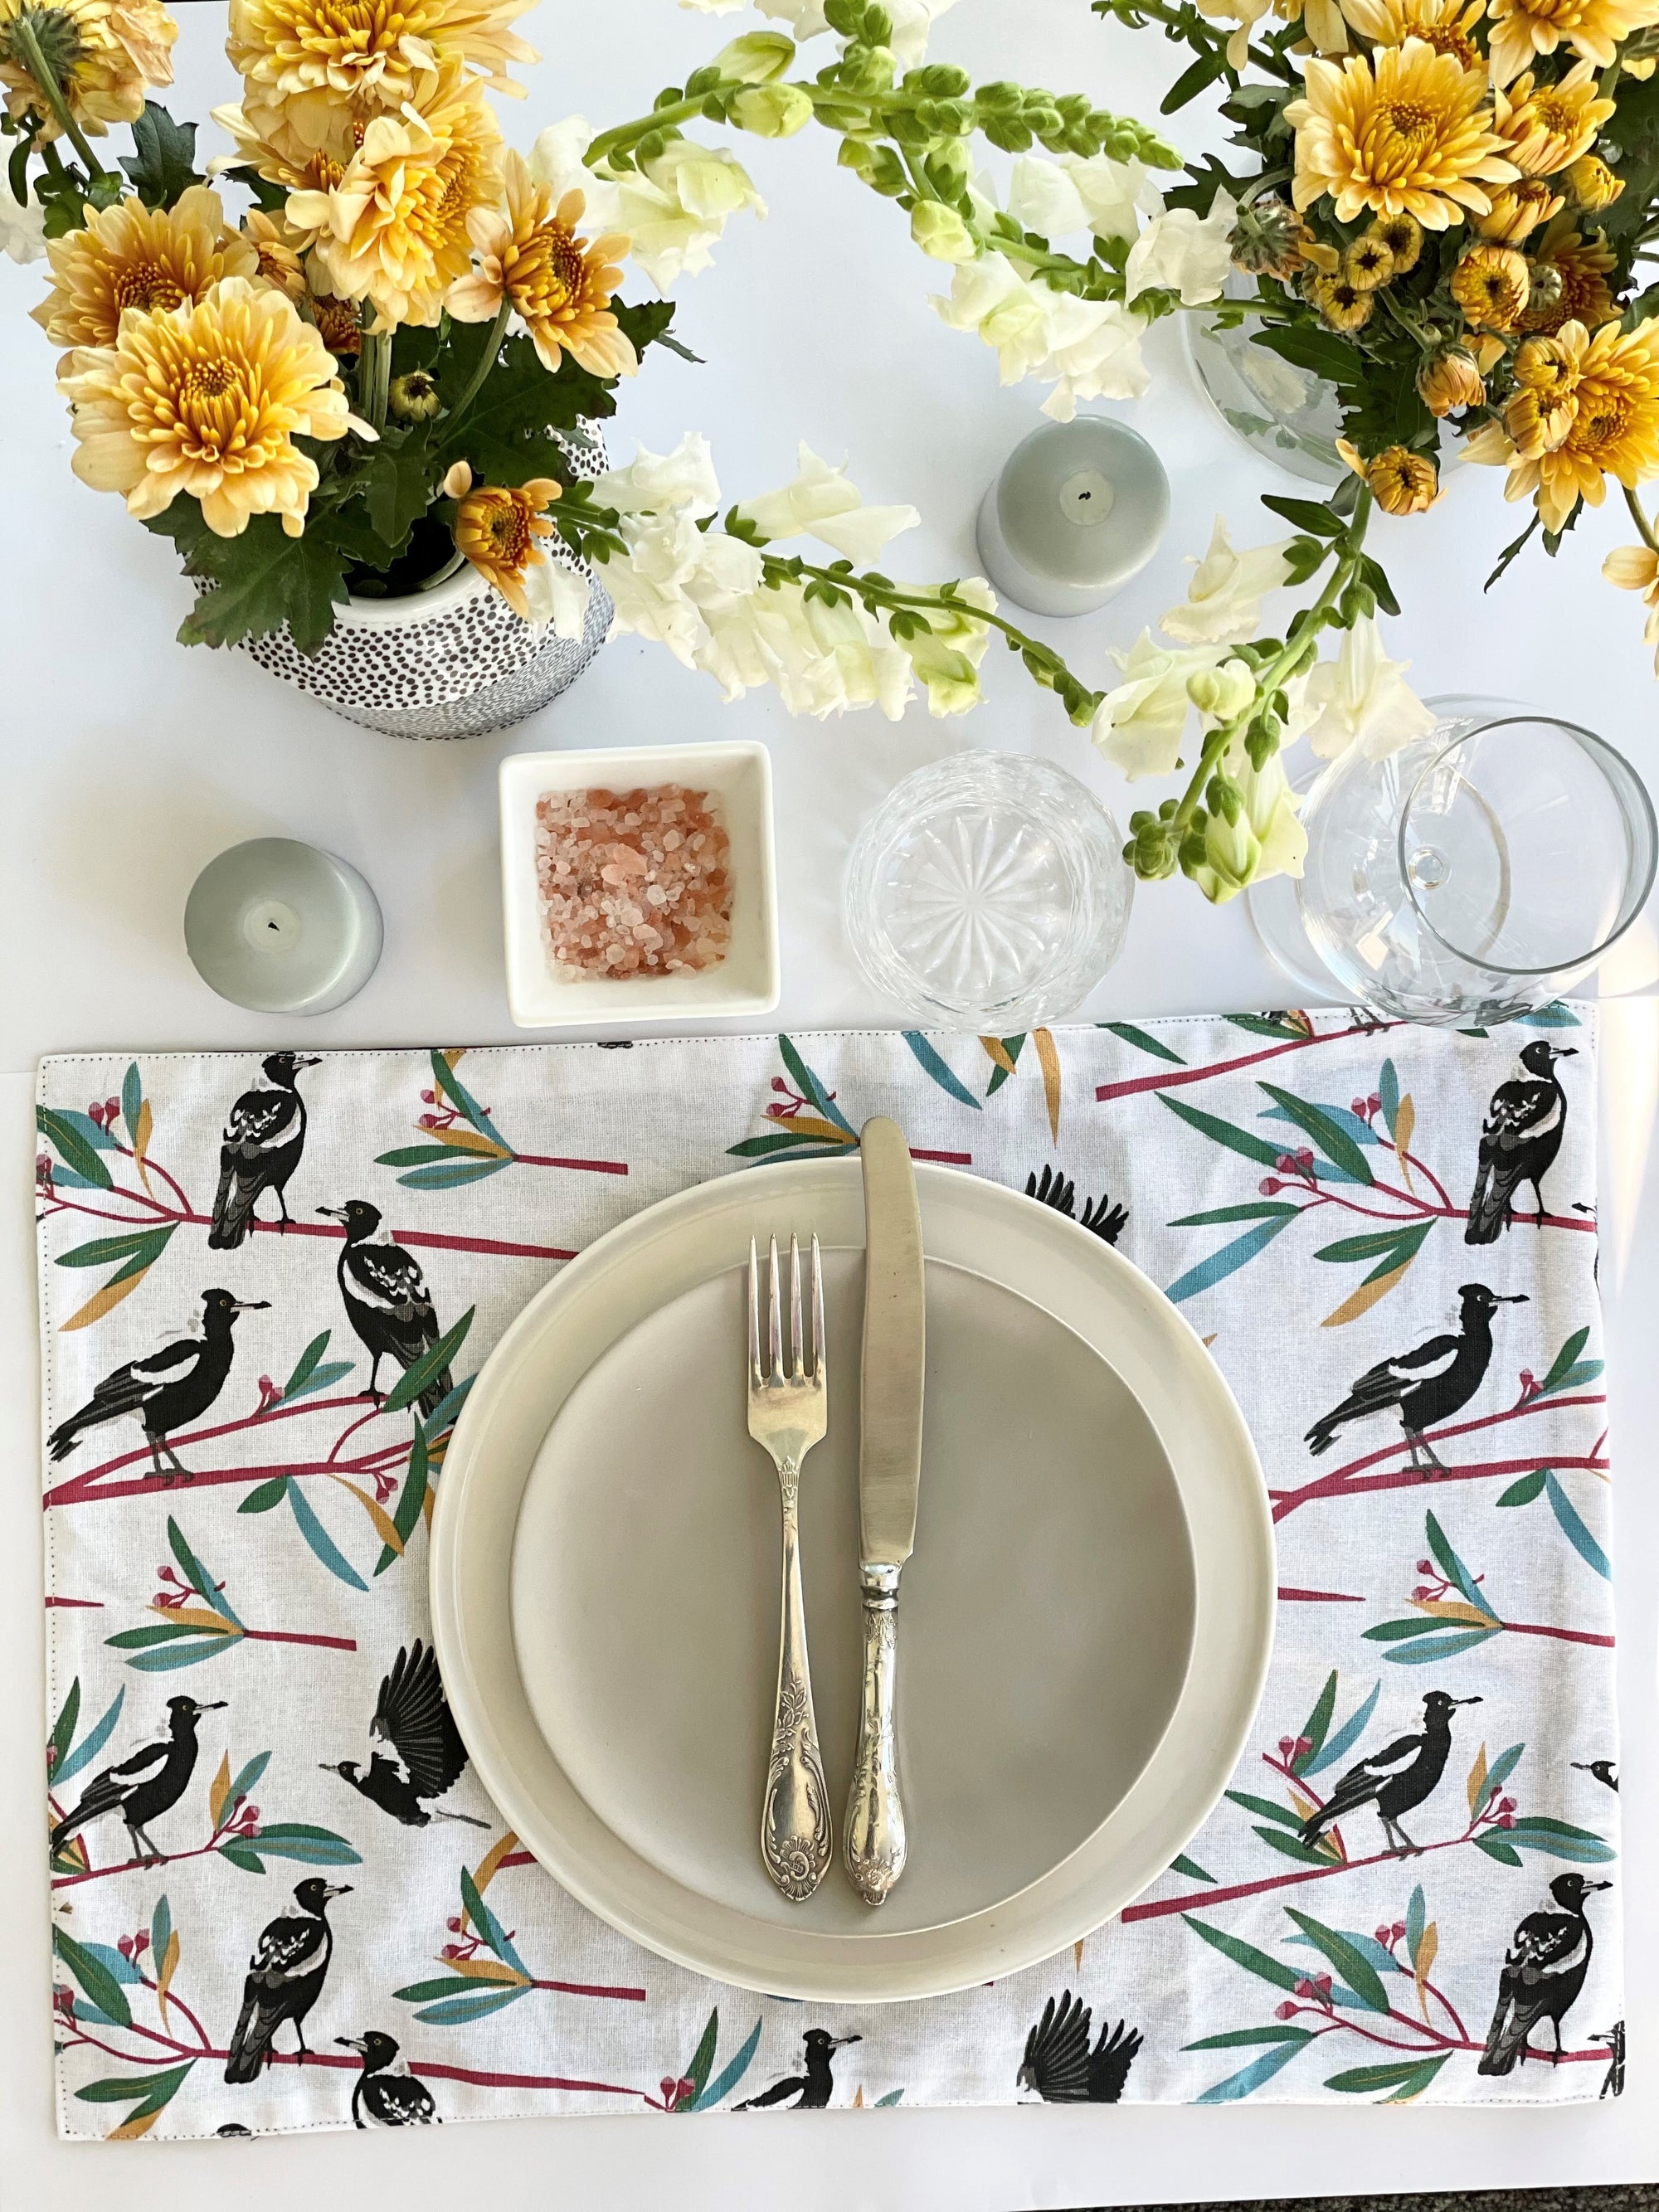 Placemats - Magpies (Set of 4)